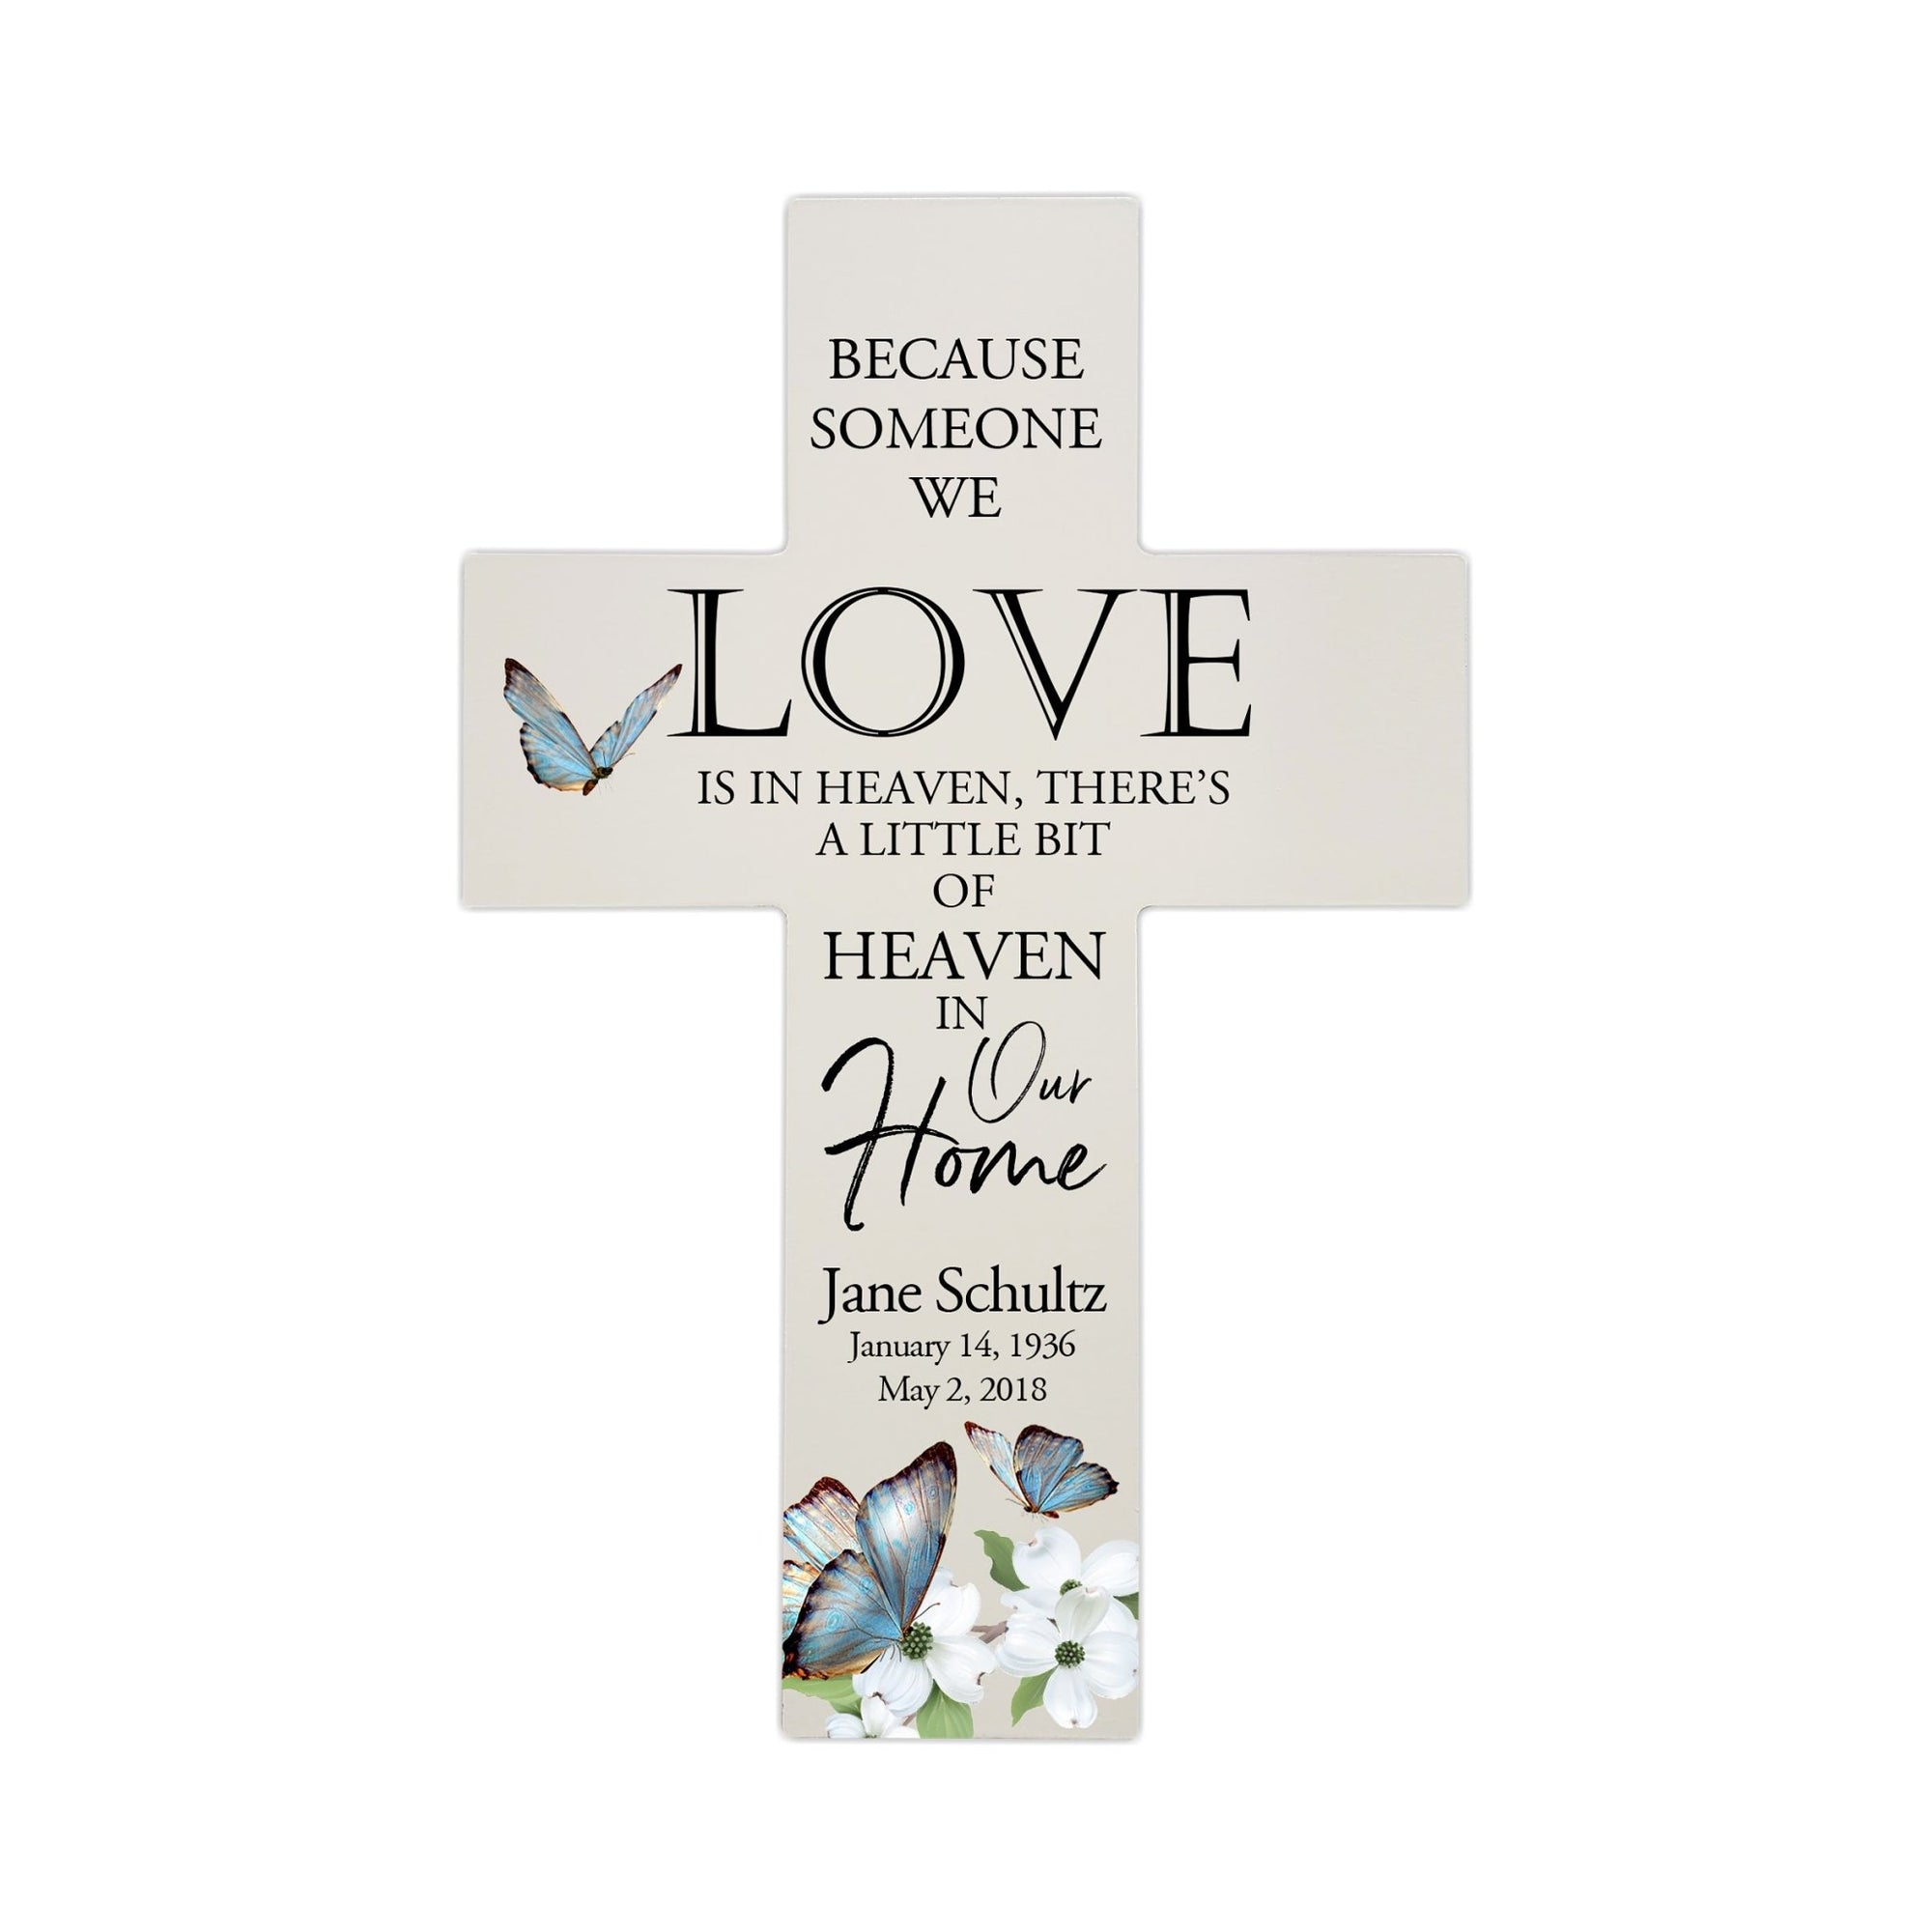 Personalized Butterfly Memorial Bereavement Wall Cross For Loss of Loved One Because Someone We Love (Butterfly) Quote 14 x 9.25 Because Someone We Love Is In Heaven, There's A Little Bit Of Heaven In Our Home - LifeSong Milestones